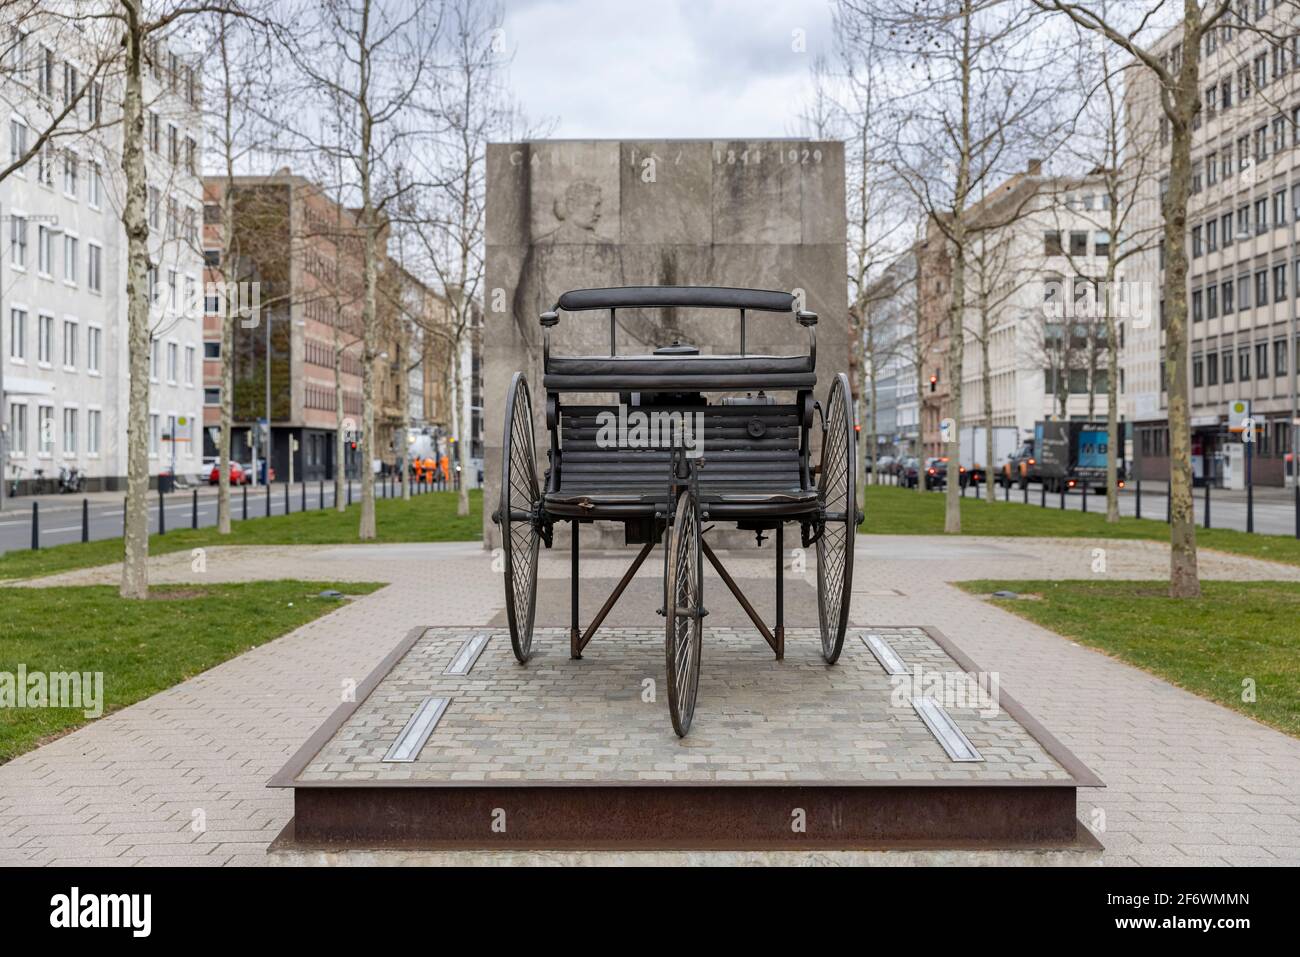 Mercedes Benz factory was built in Mannheim originally in 1906. A monument has been erected downtown to remind of city's part of automotive history. Stock Photo